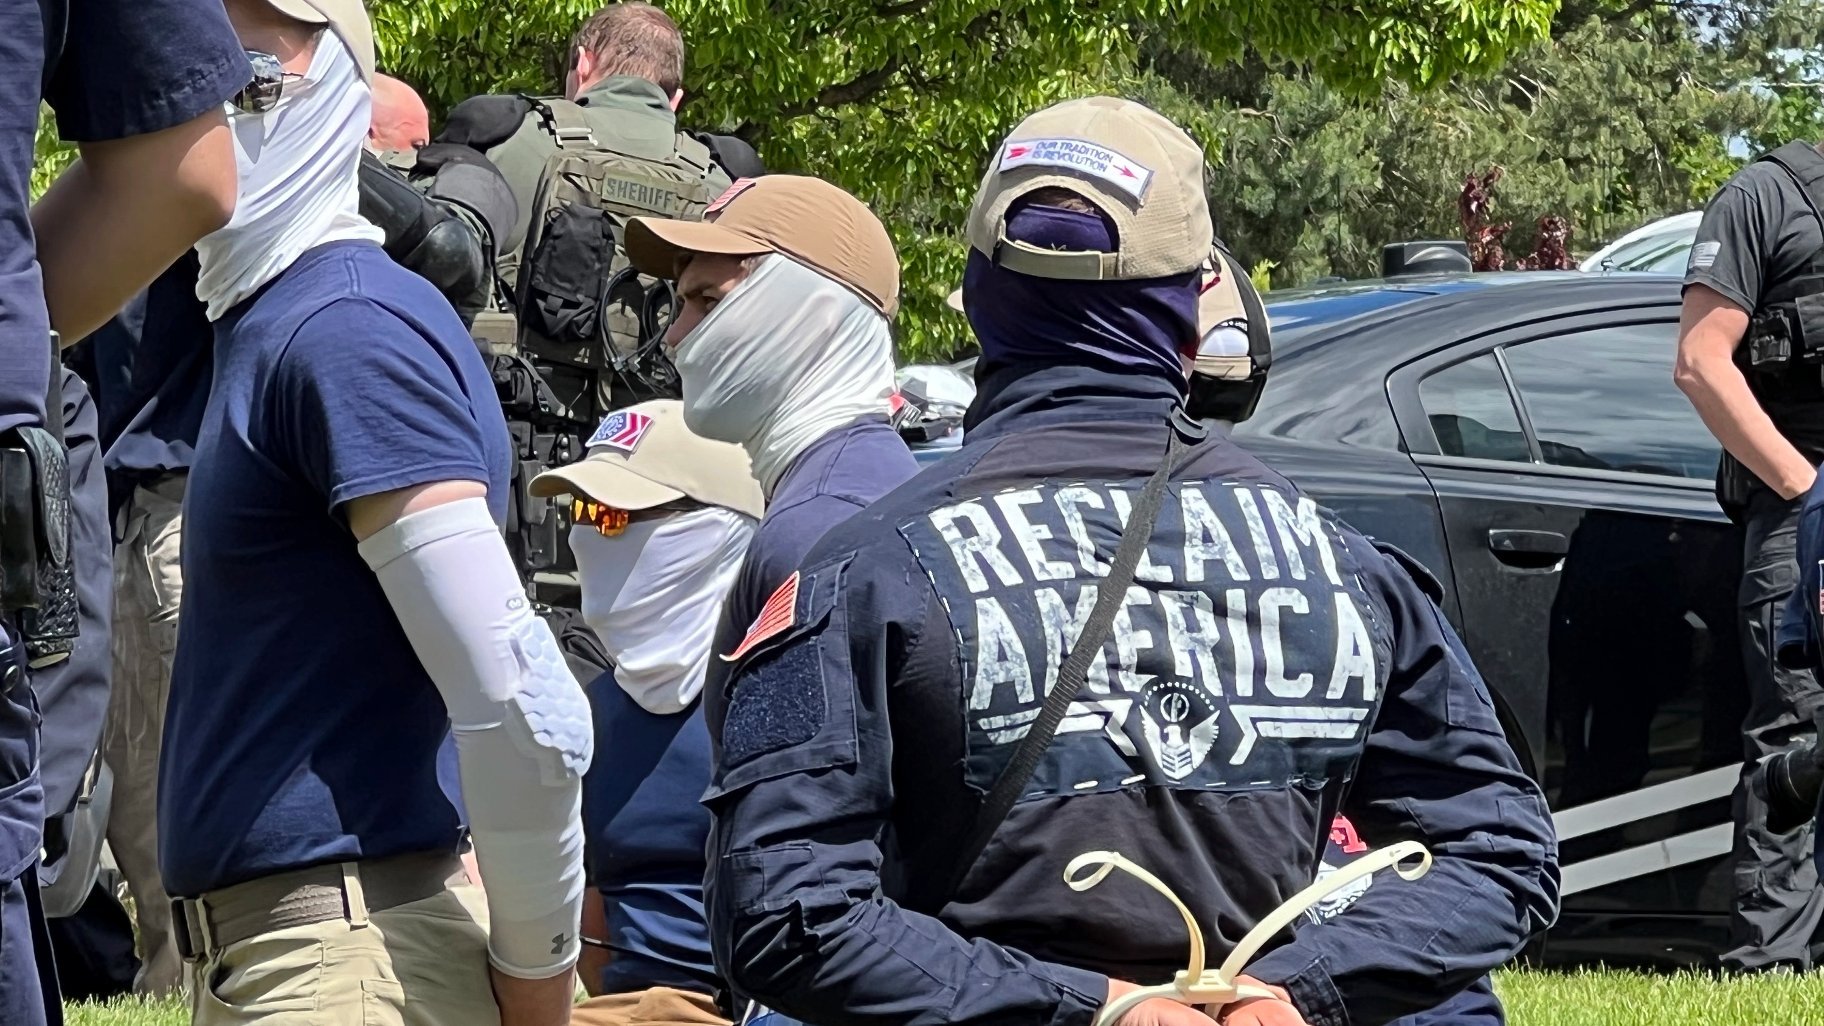 South African workers kill white supremacist leader